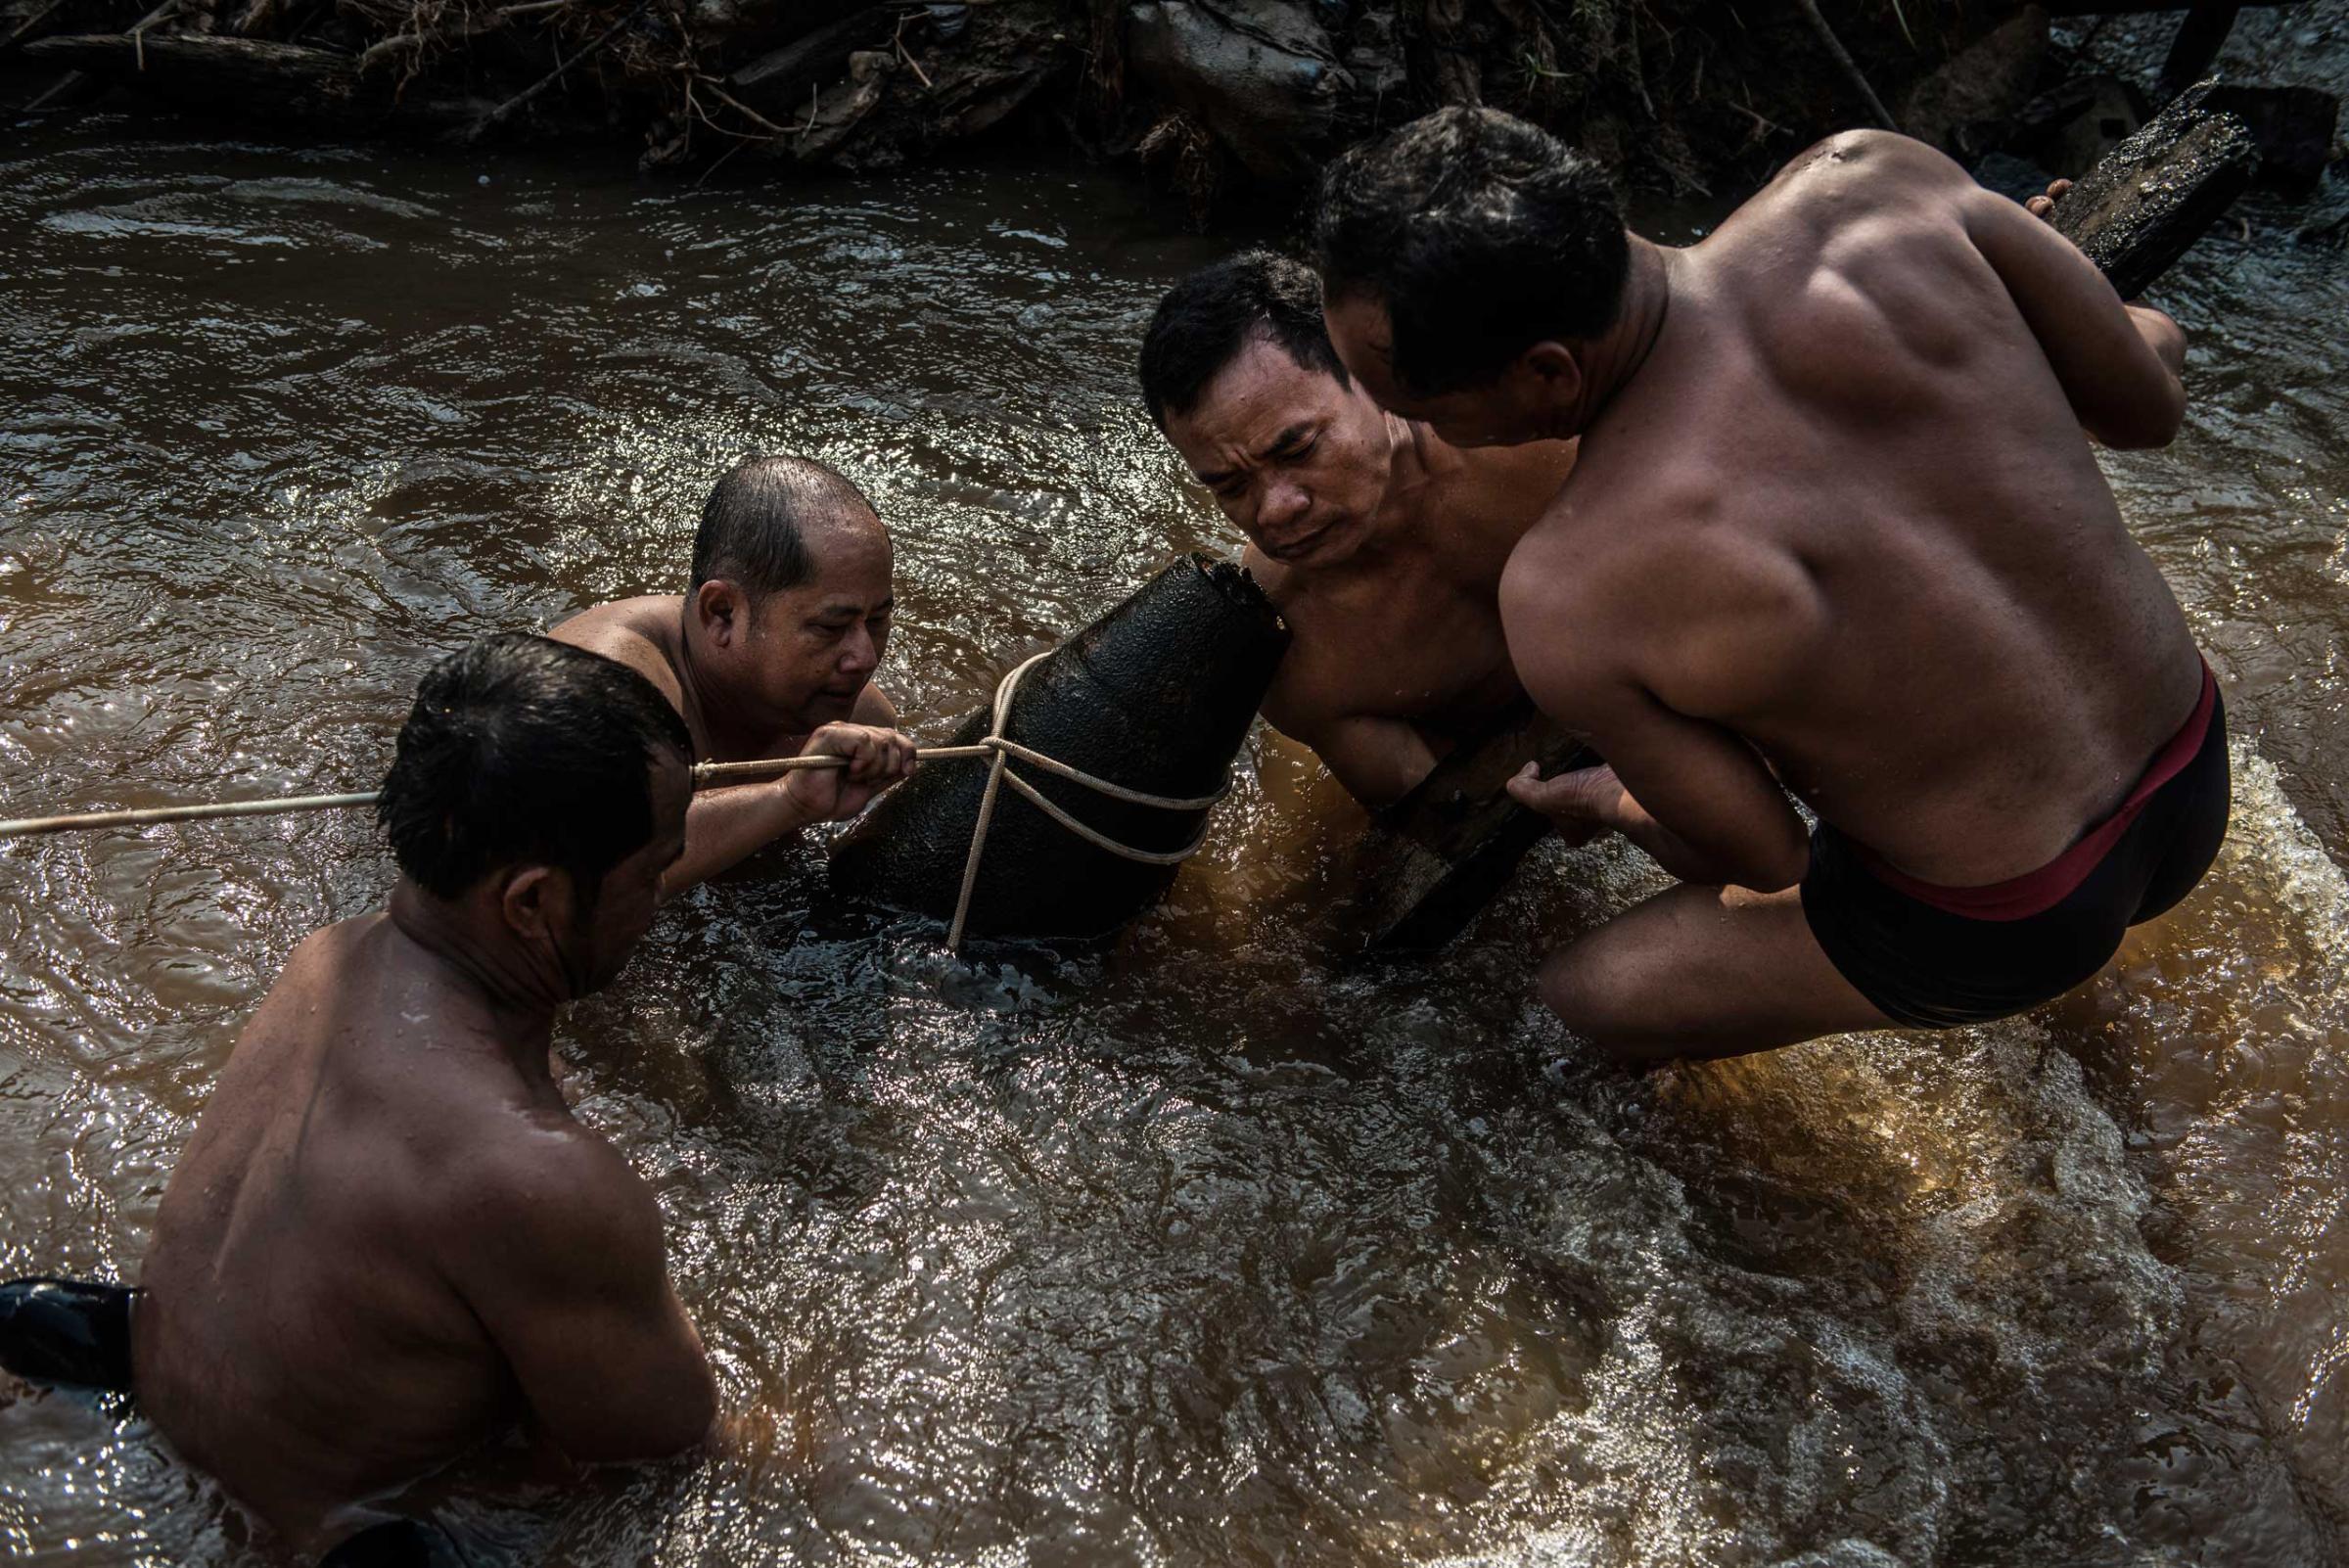 The UXO salvage dive team handles an unexploded 1000 pound bomb found in a river in Kratie Province, Cambodia in April 2015.